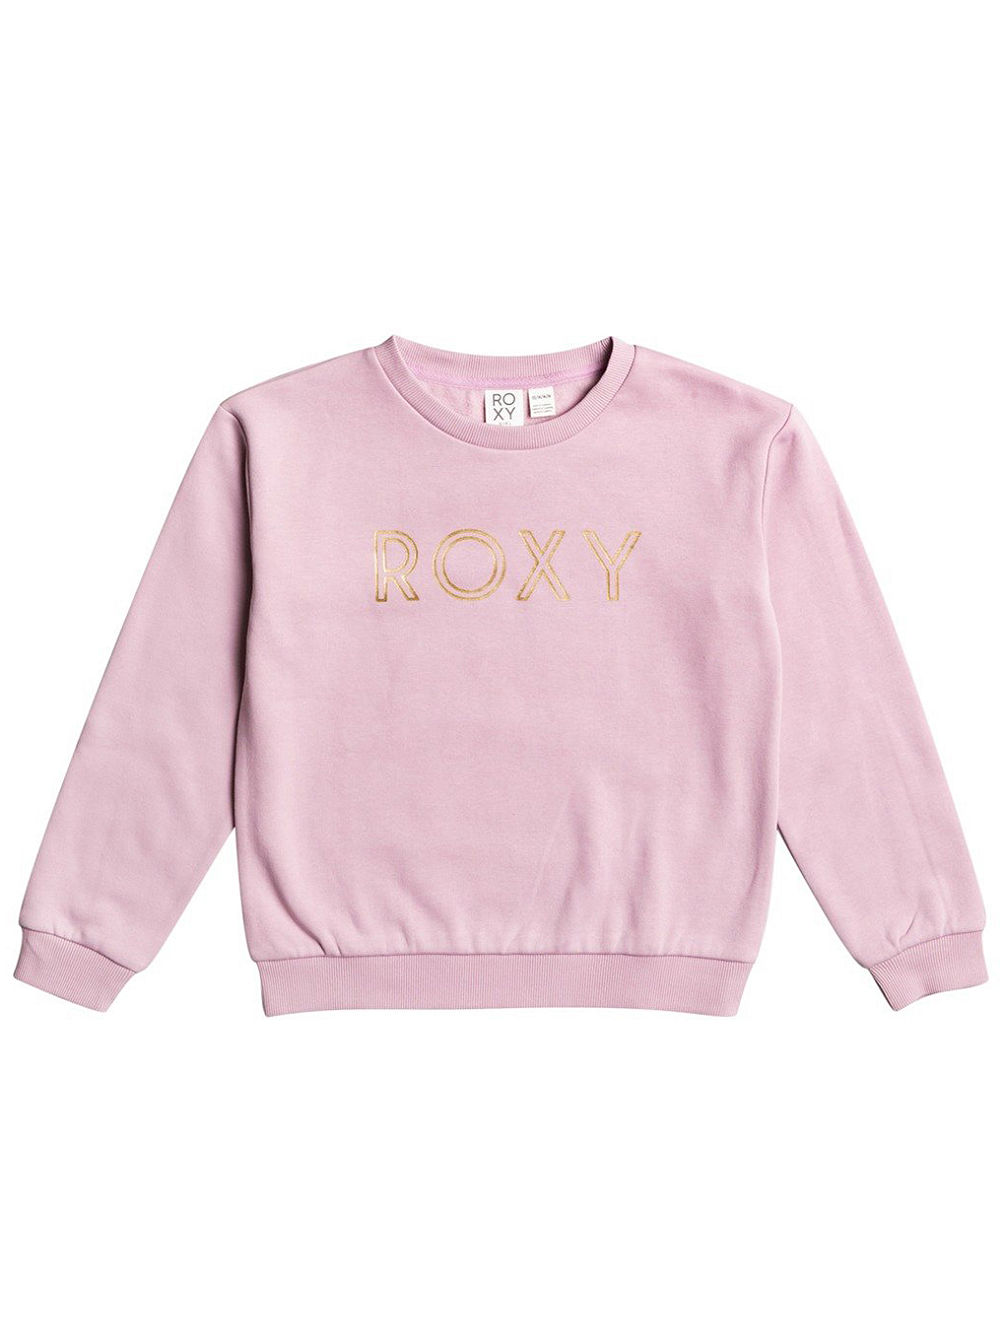 Spring Day Sweater